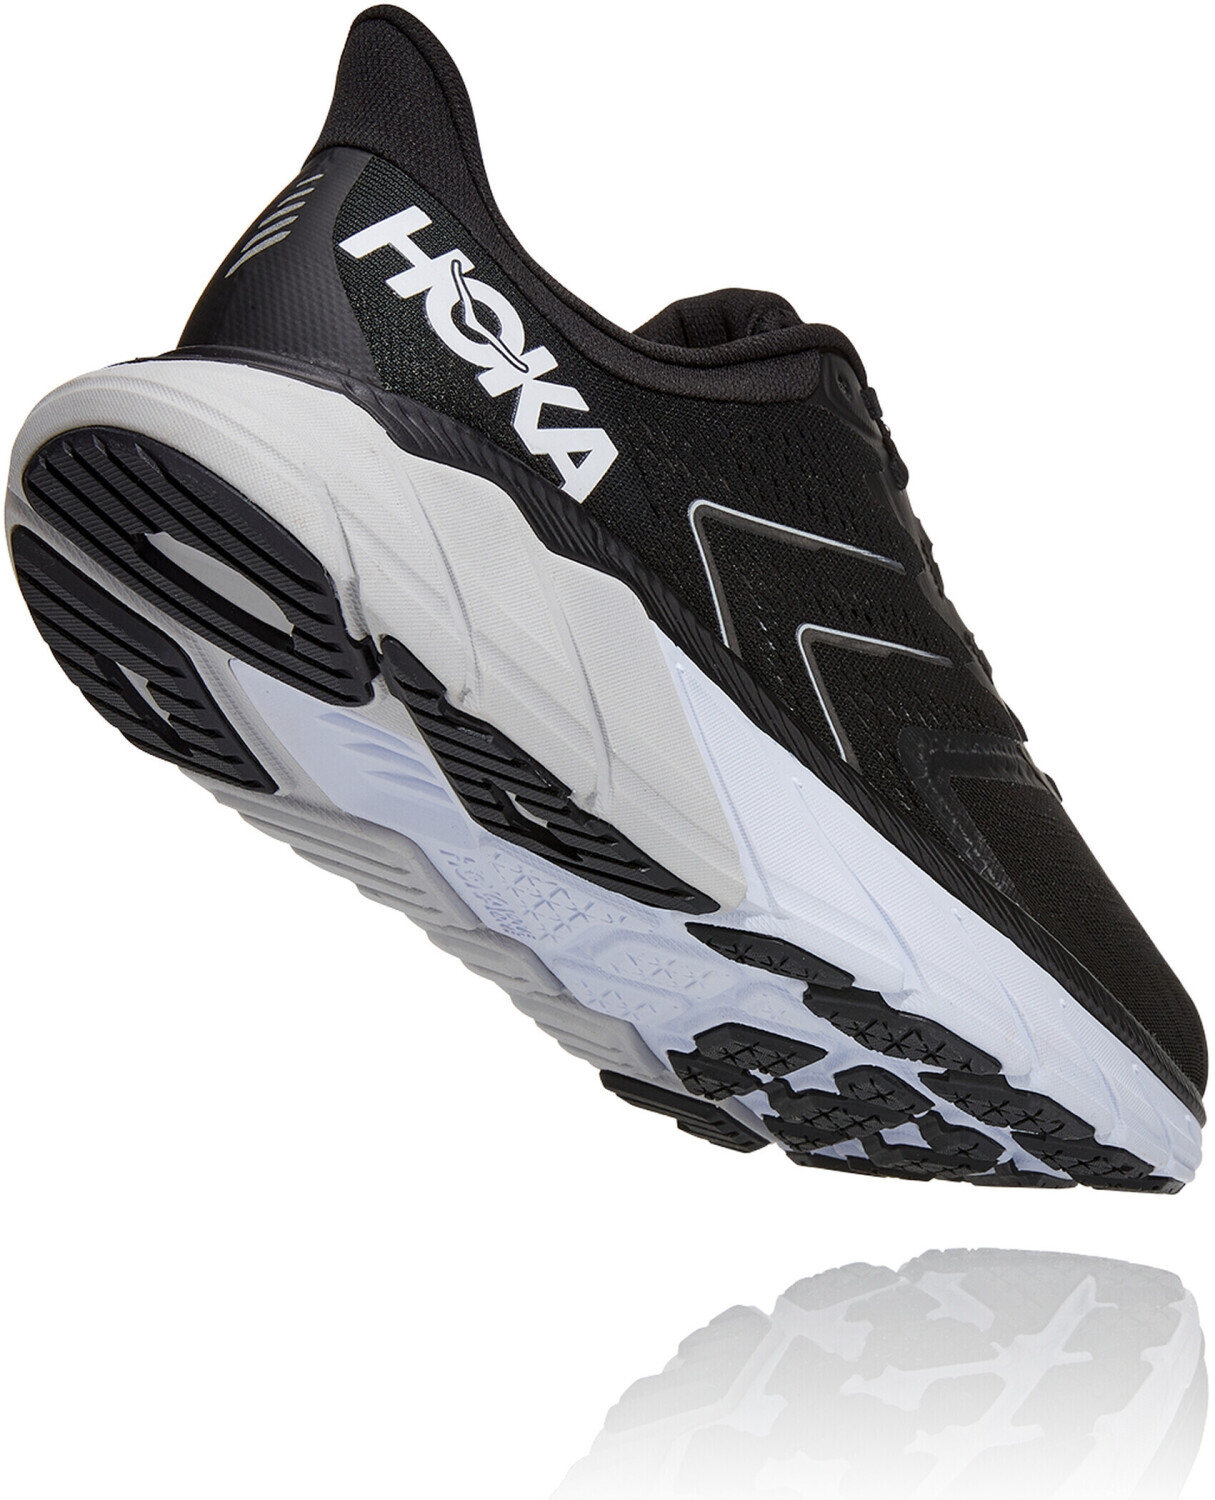 Buy Hoka One One Arahi 5 black/white from £62.48 (Today) – Best Deals ...